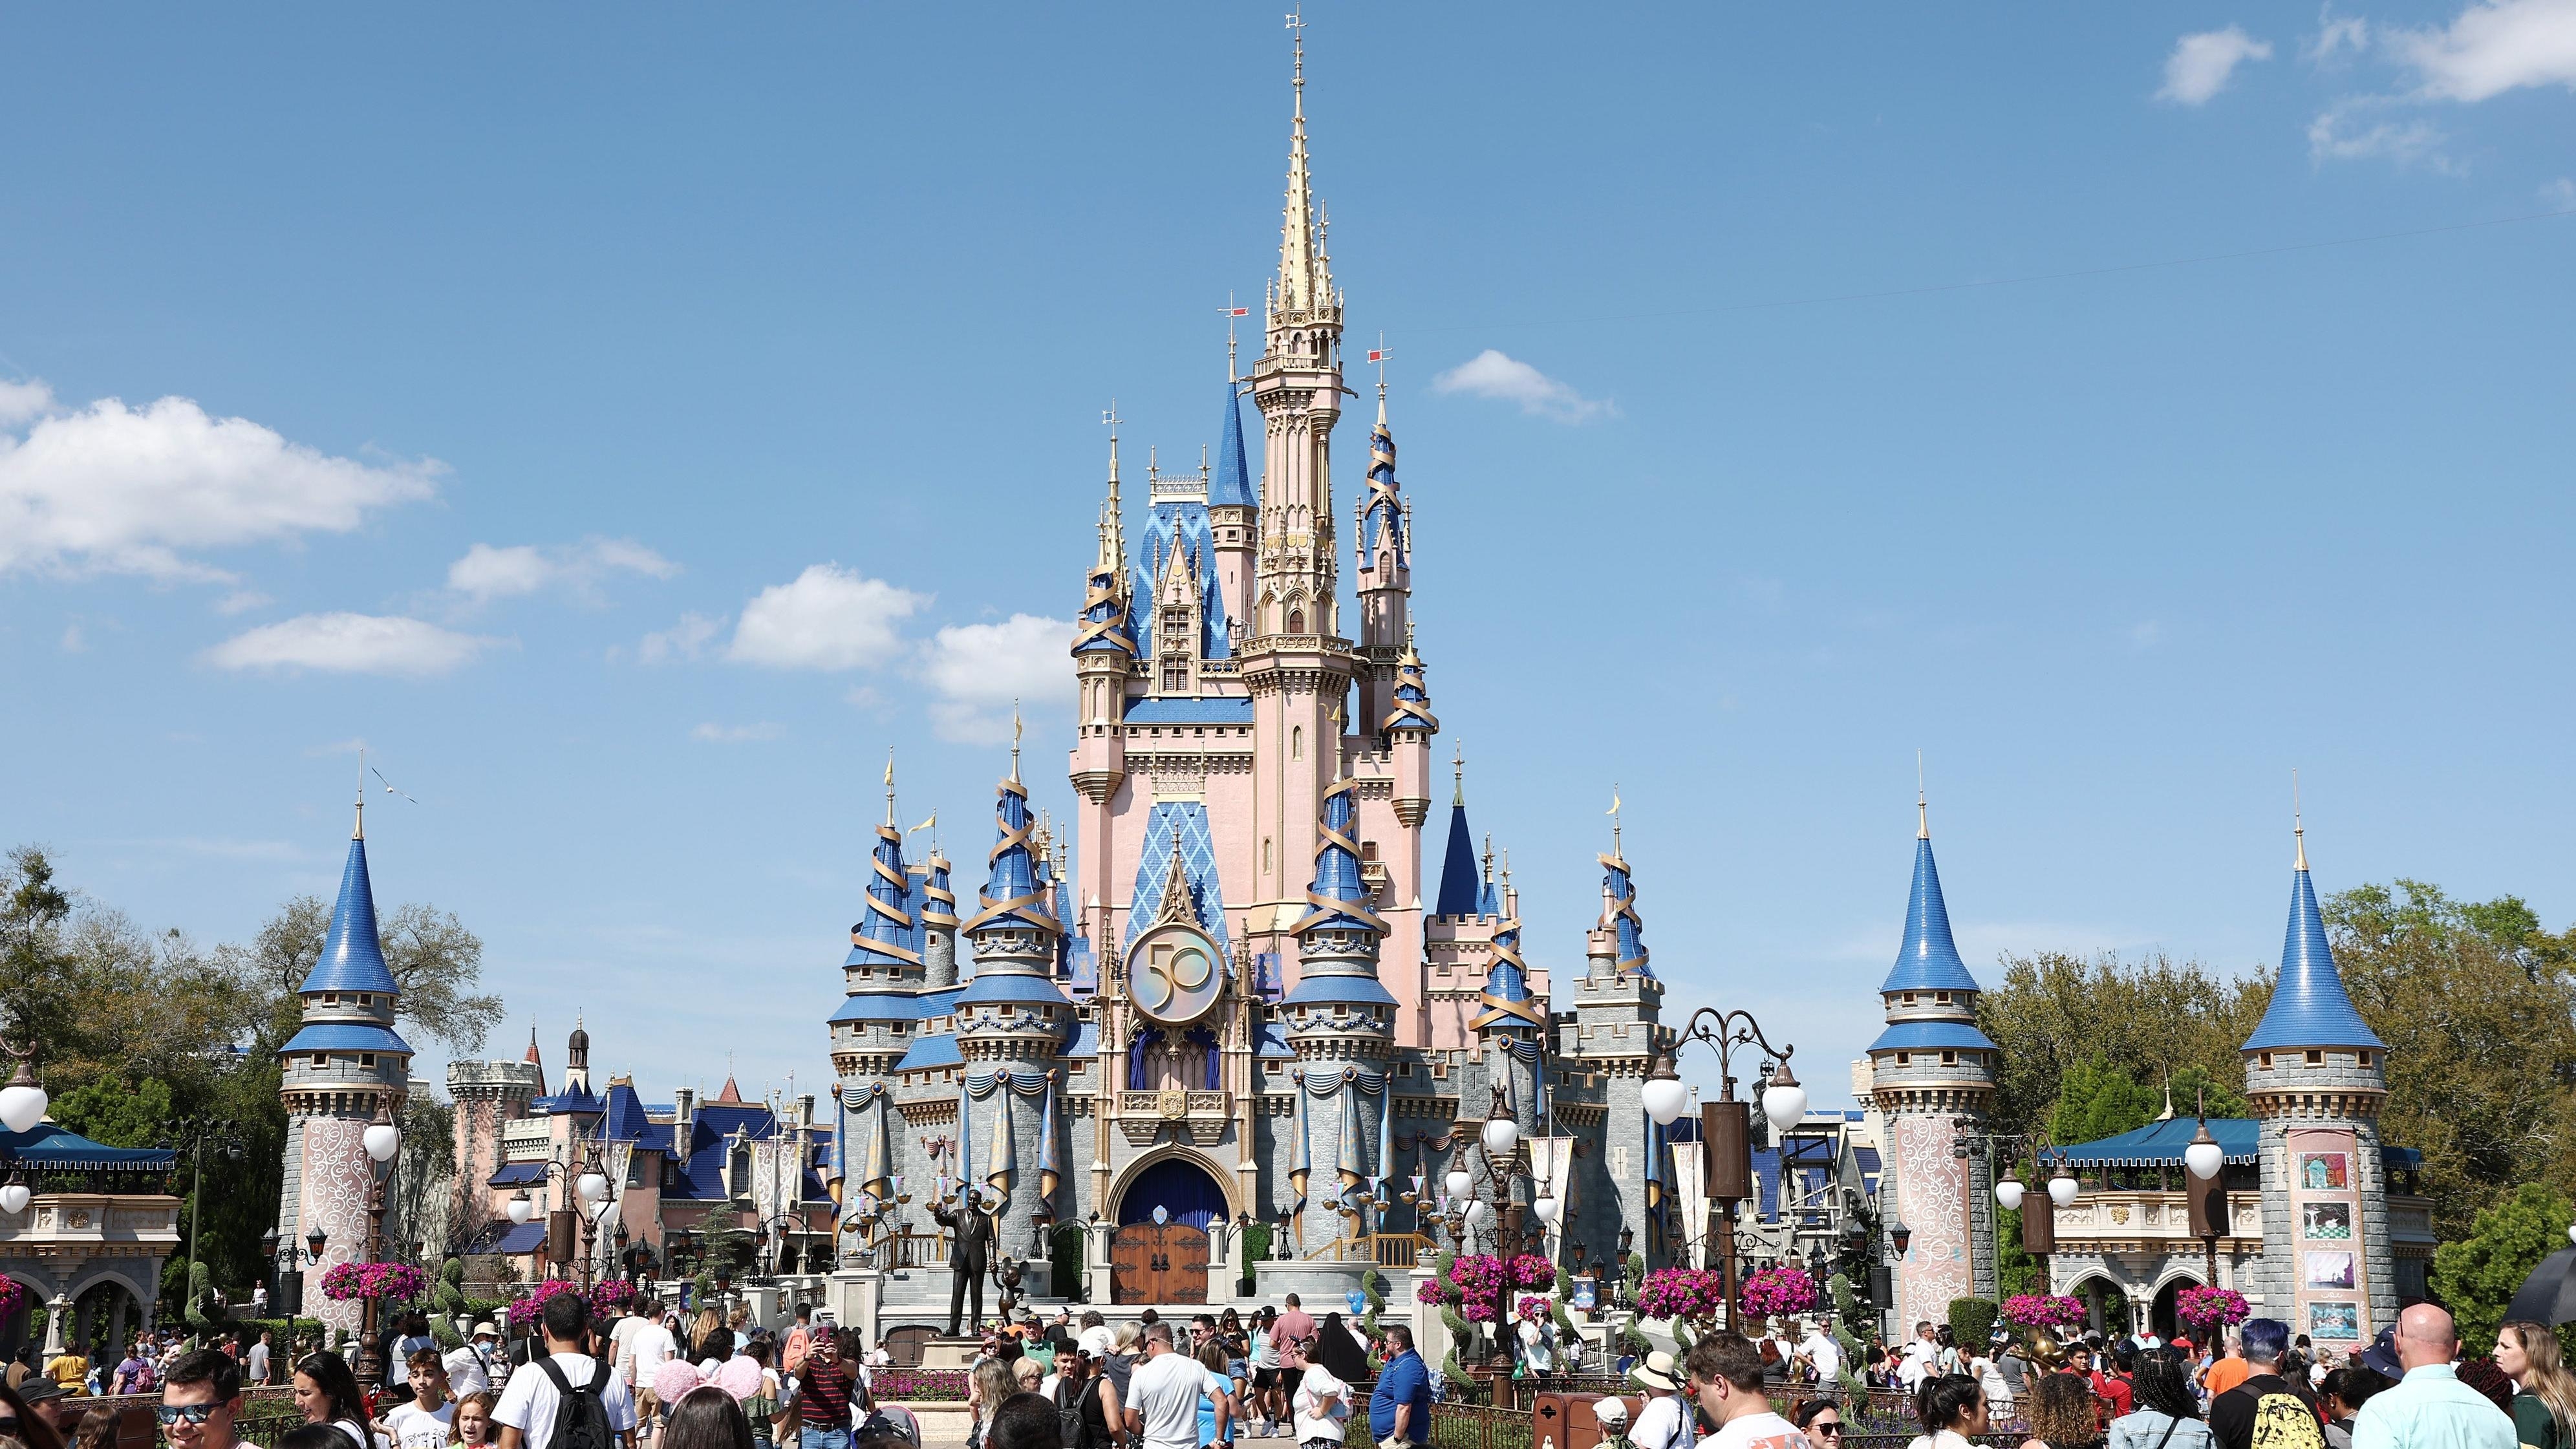 Disney employees plan walkouts over company’s response to the “Don’t Say Gay” bill